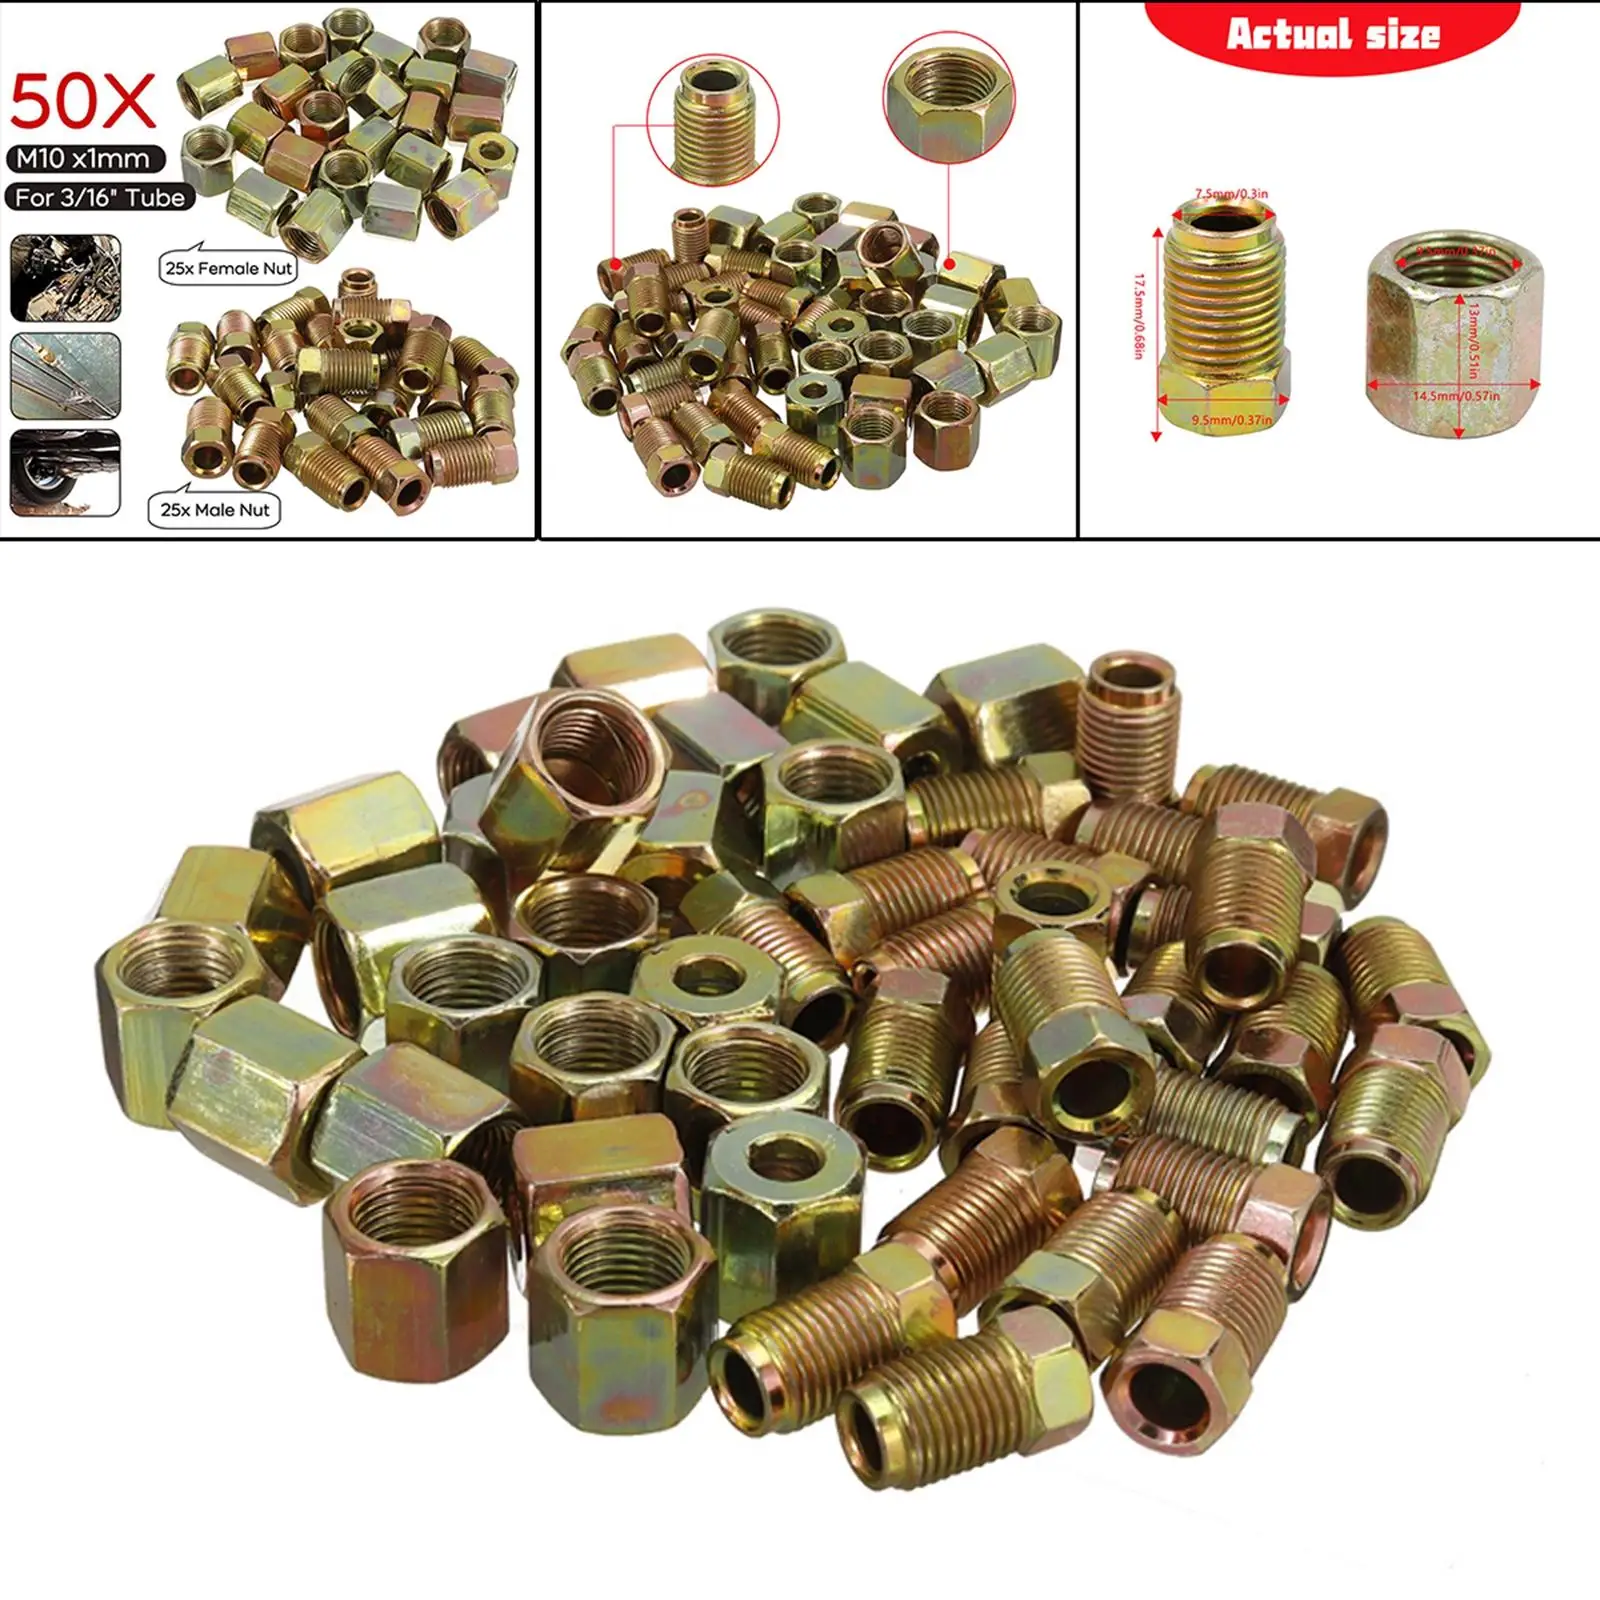 50/Set Brake Line Connector Fittings 10mm x 1mm Female/Male Metric Nuts for 3/16 Tube Accessory